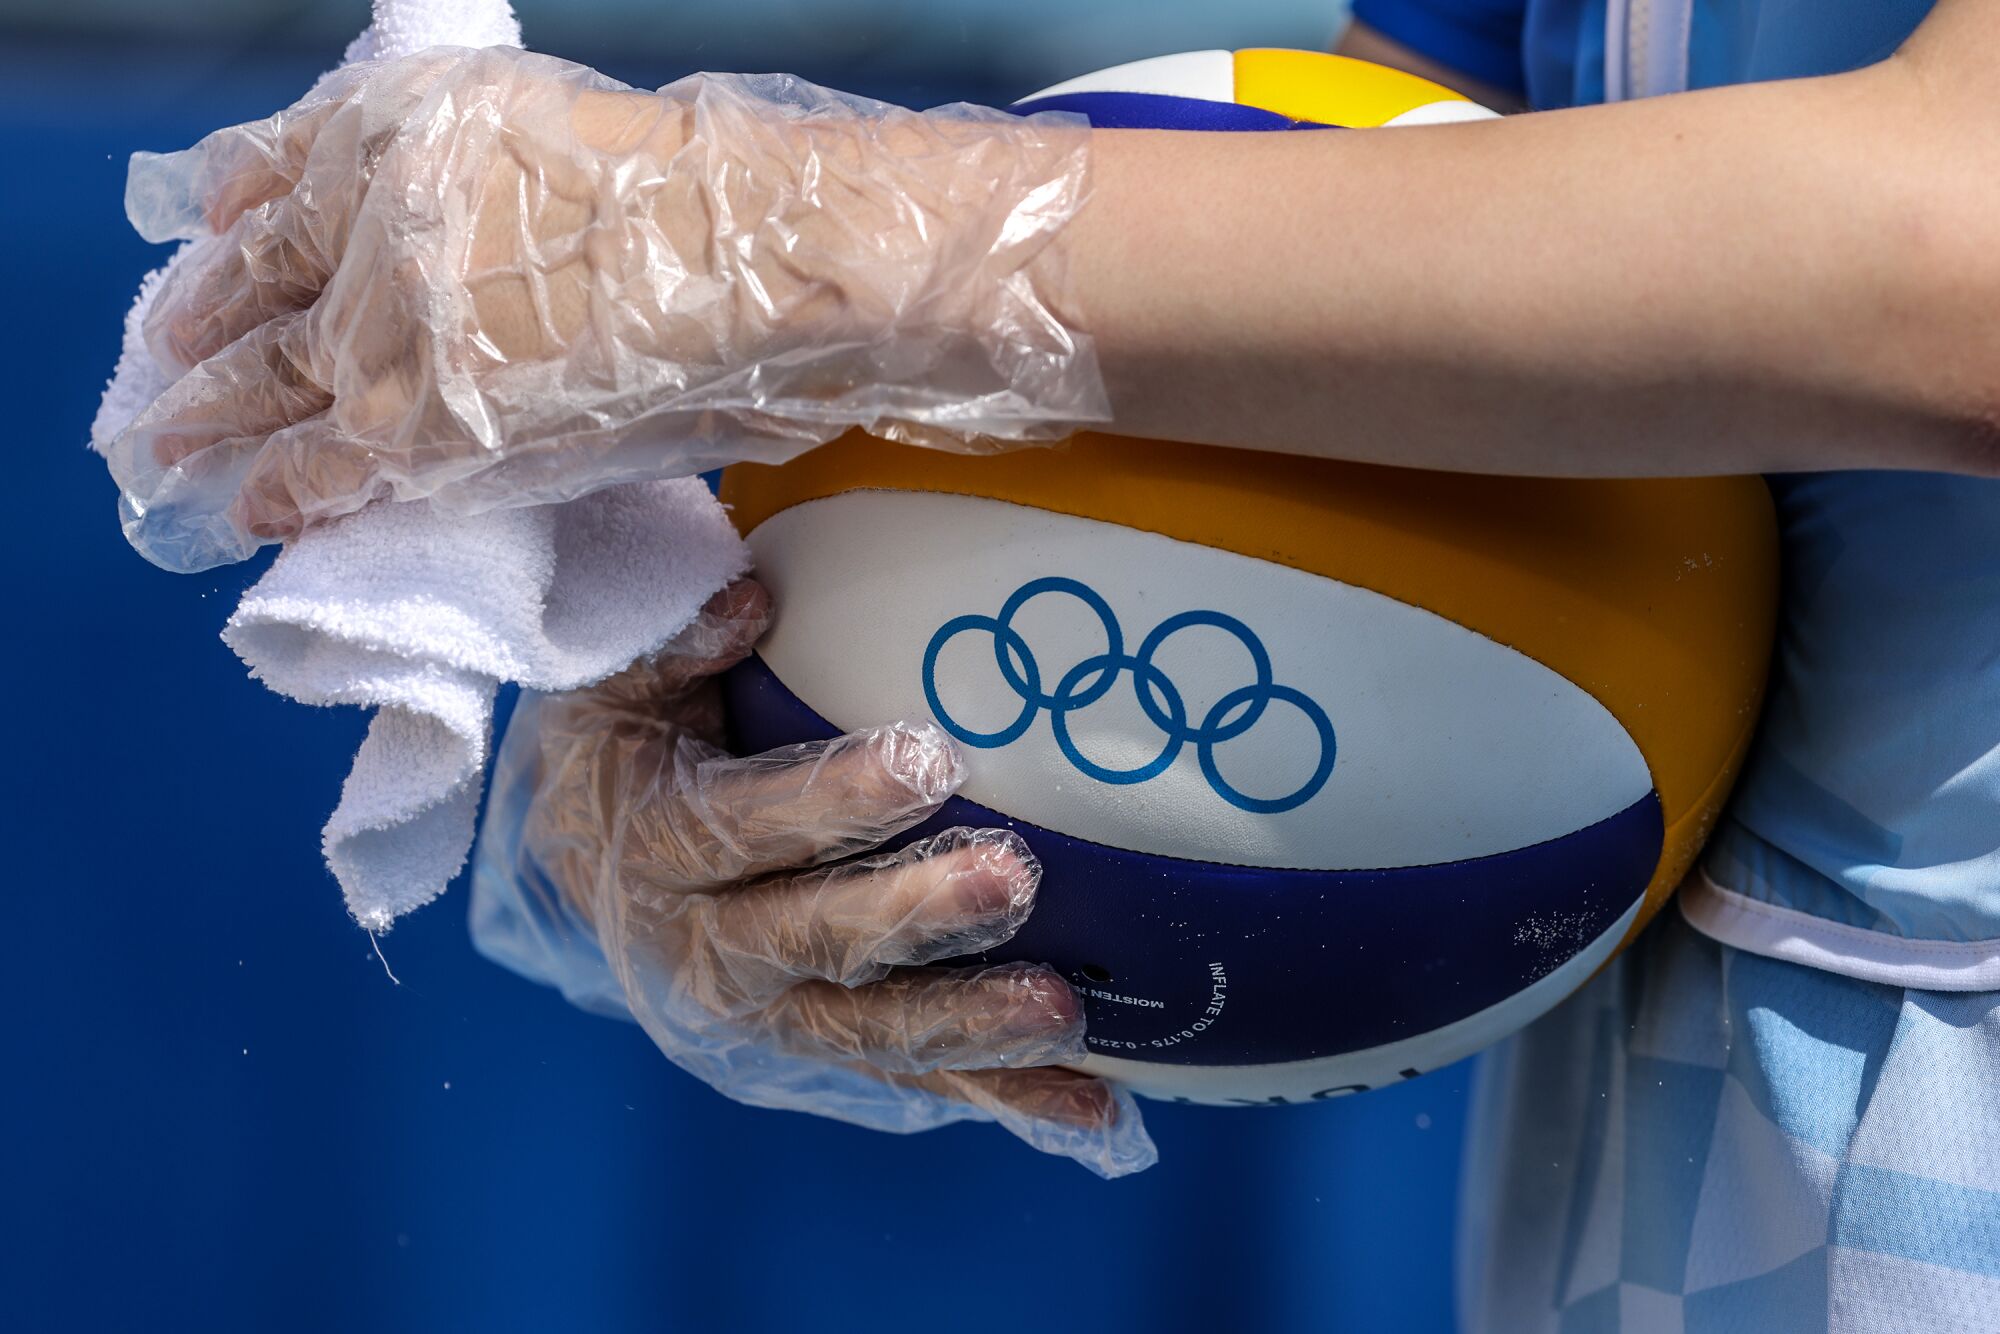 Volleyballs are wiped by assistants who wear plastic gloves to remain Covid-19 compliant